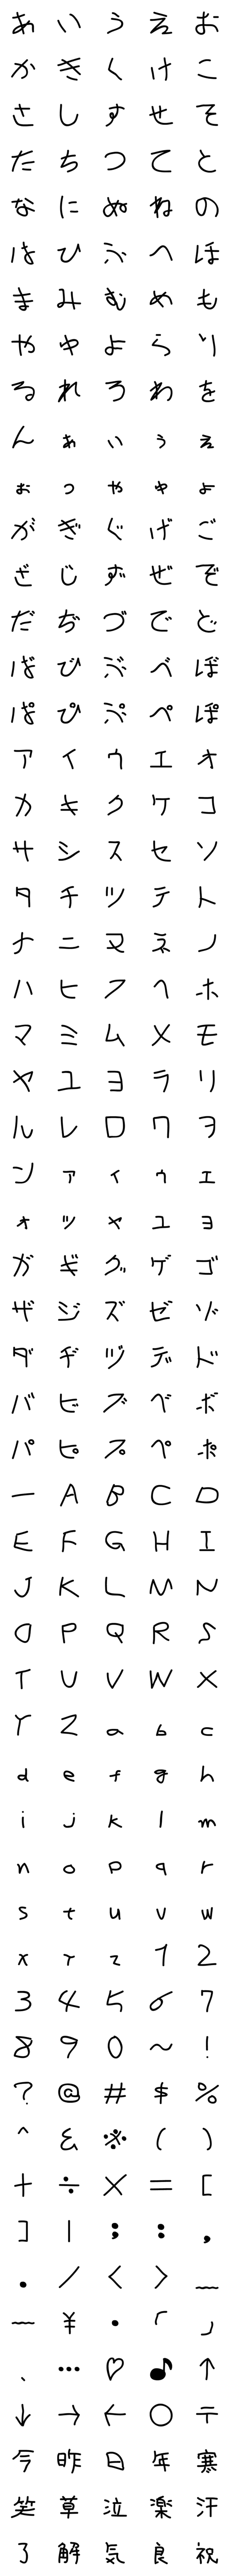 [LINE絵文字]あのころの文字【手書き風デコ文字】の画像一覧